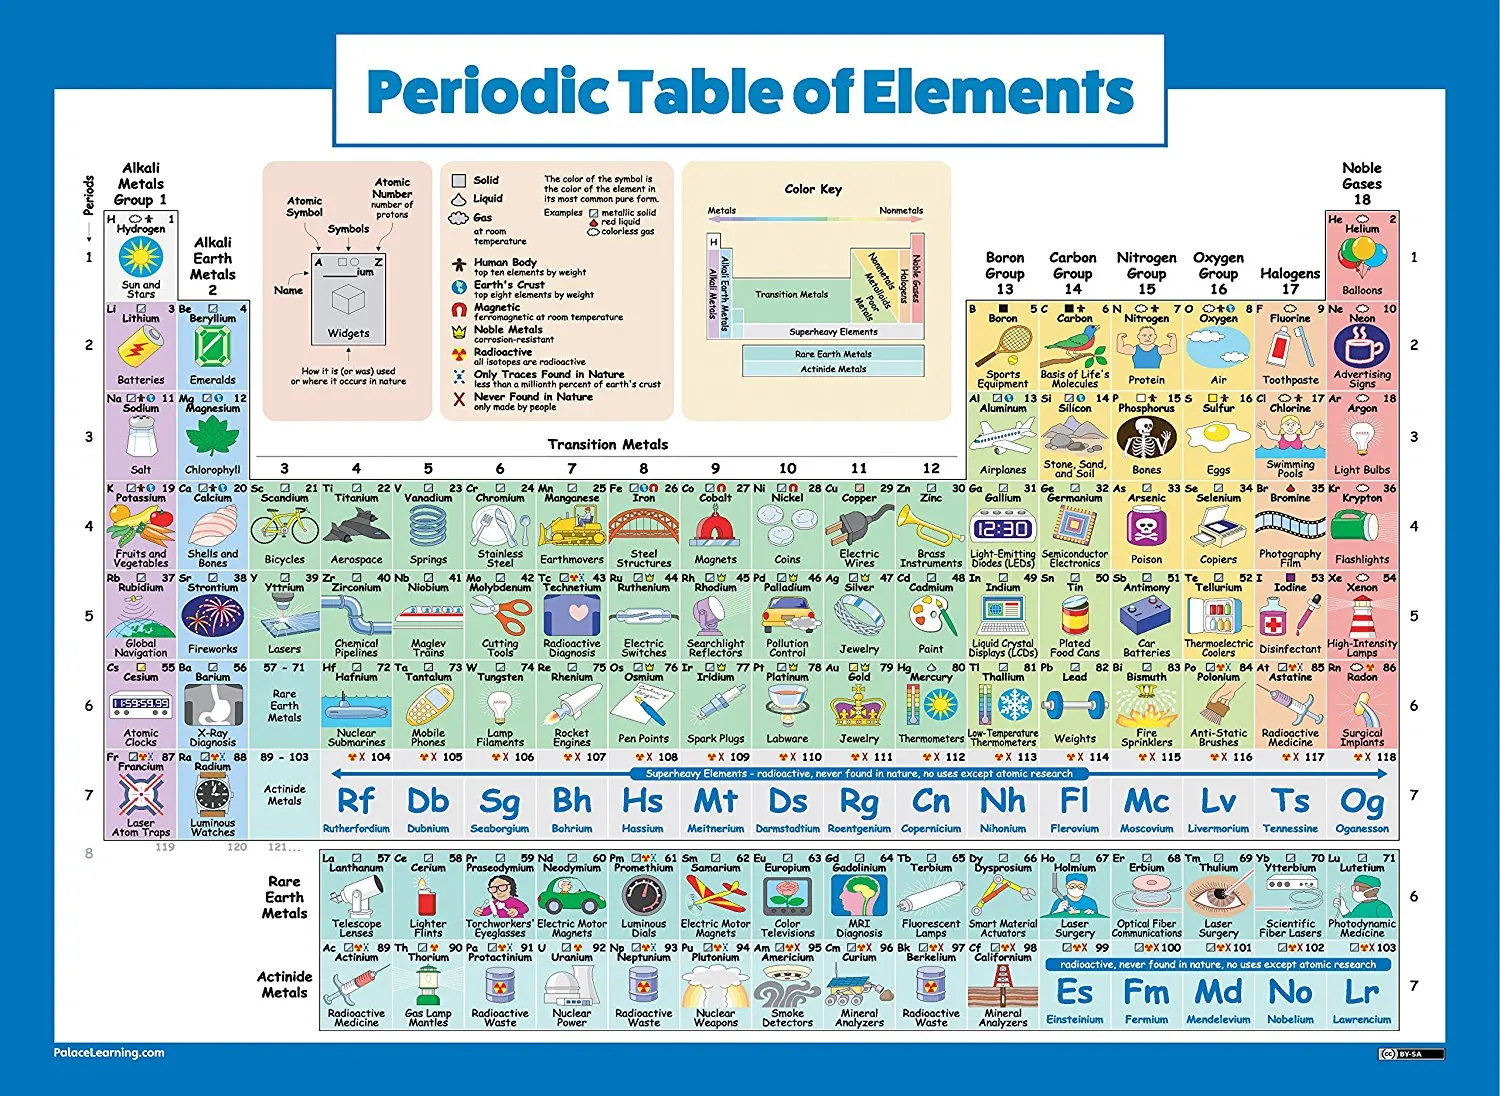 Buy Periodic Table of Elements Poster For Kids - LAMINATED ...